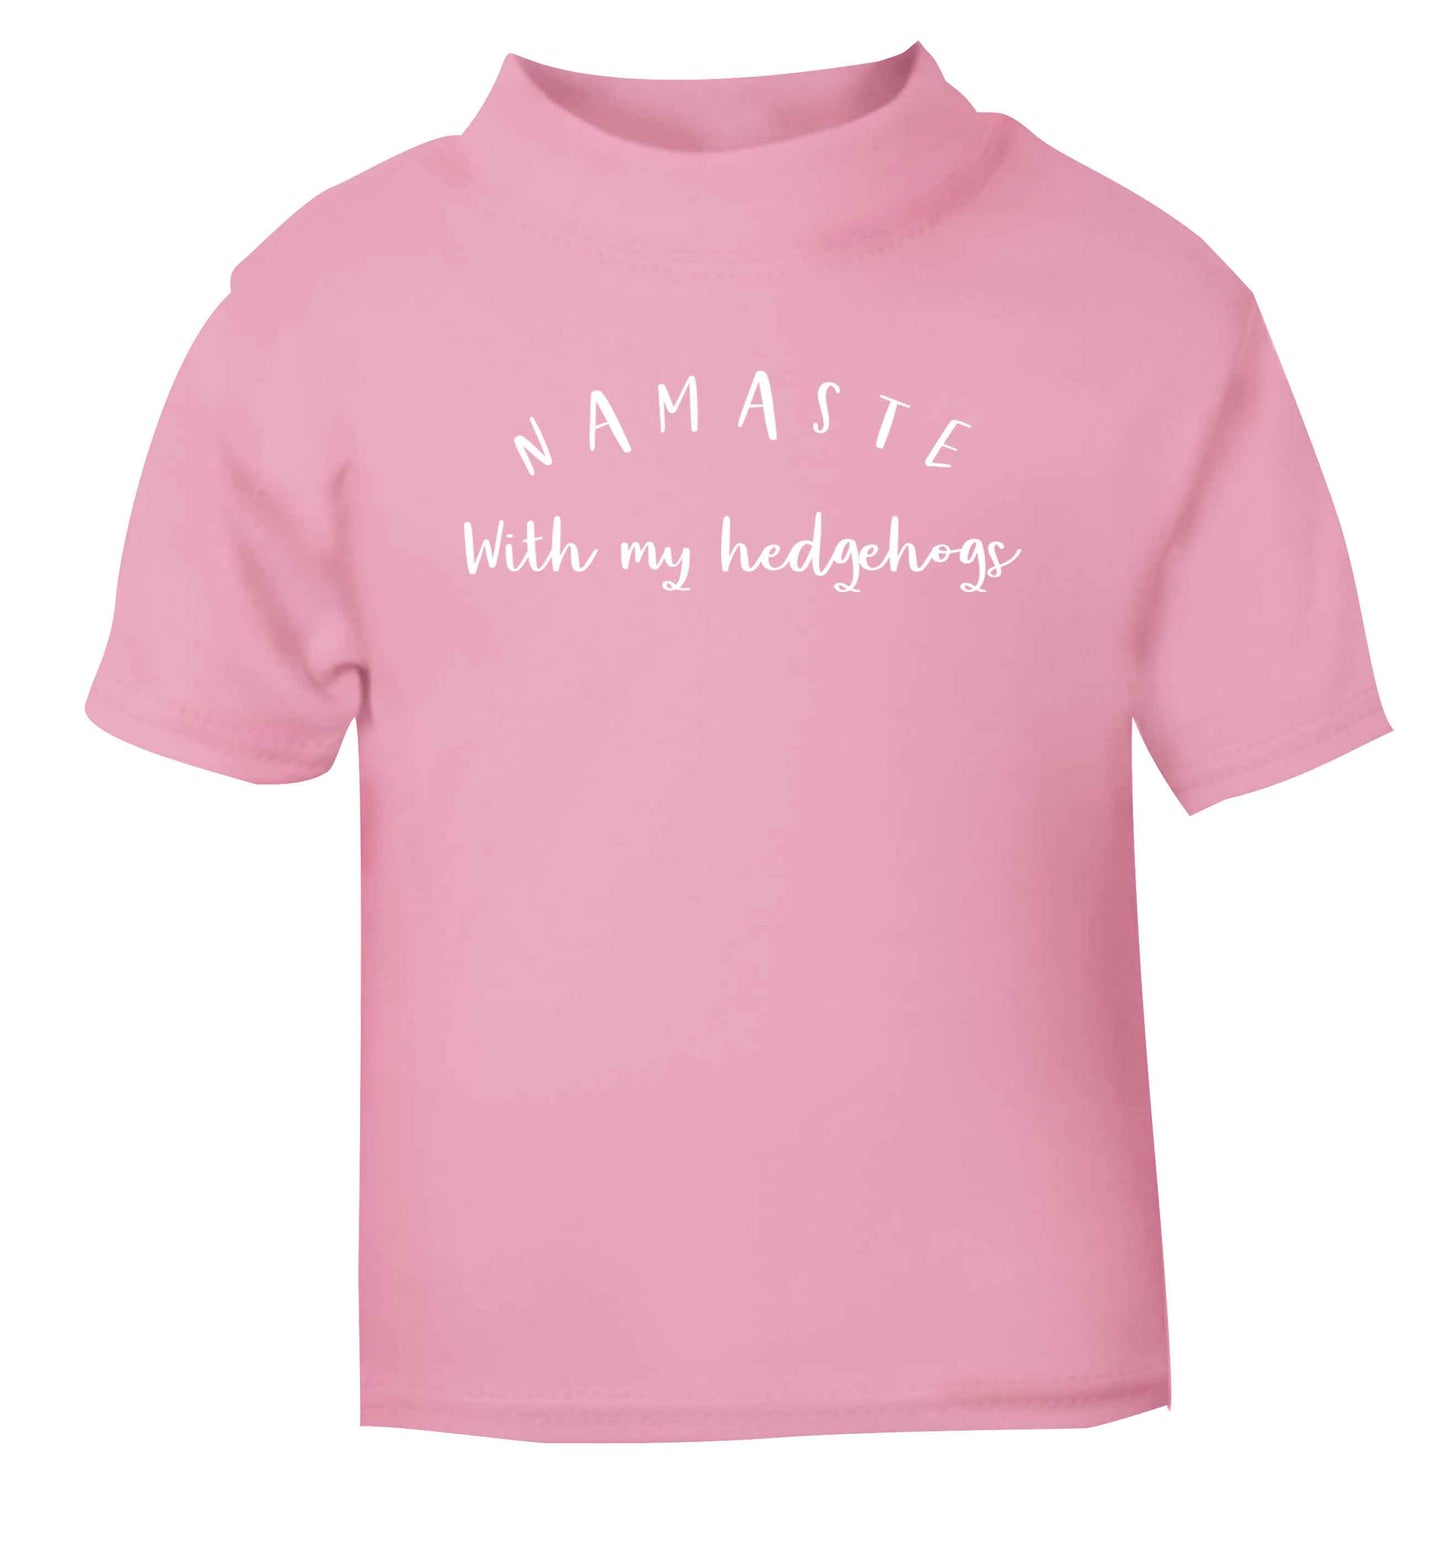 Namaste with my hedgehog light pink Baby Toddler Tshirt 2 Years